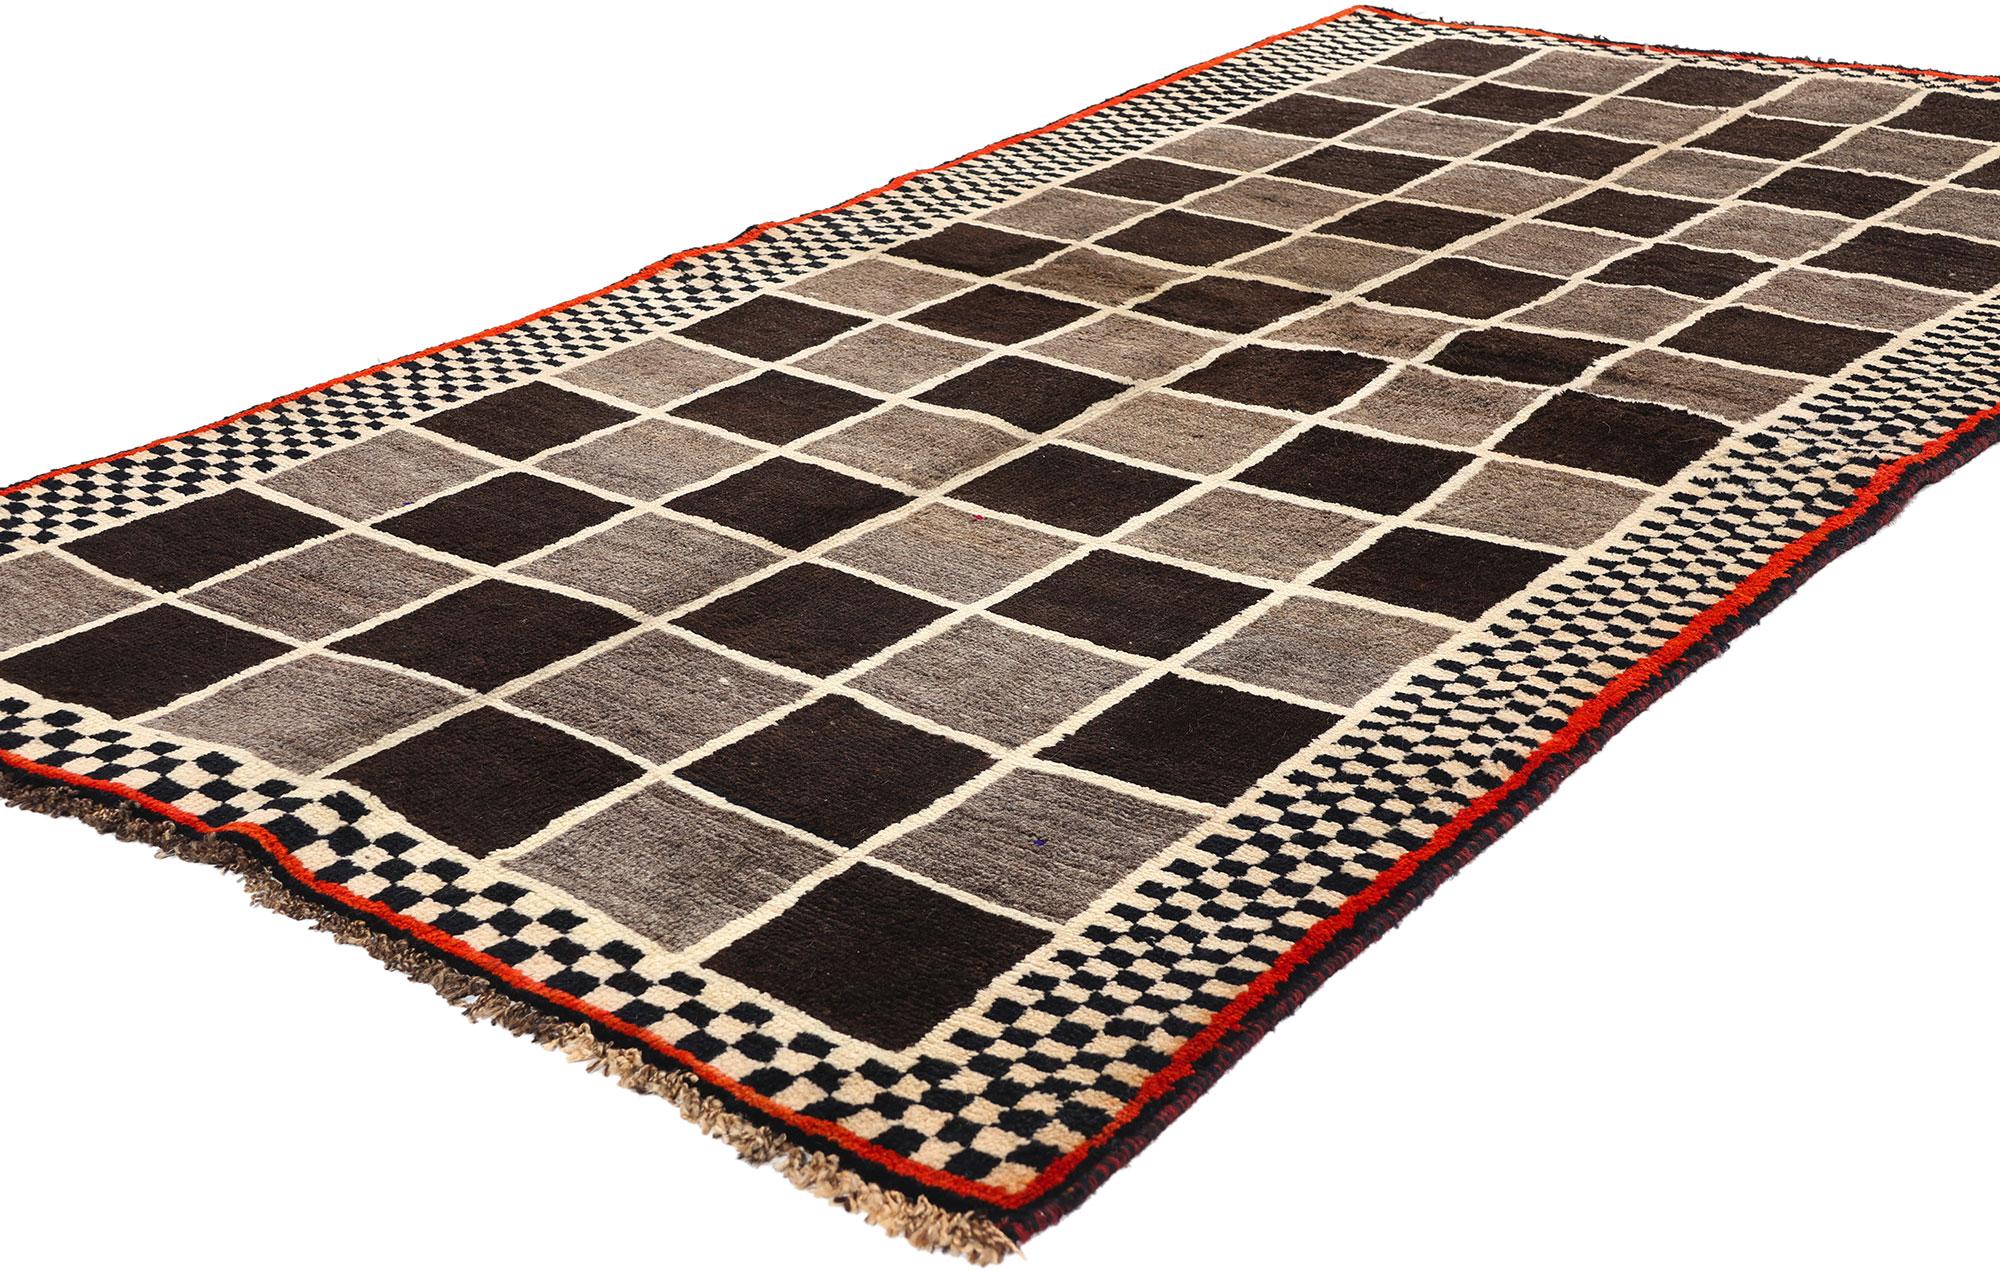 61071 Vintage Persian Gabbeh Rug with Checkerboard Design, 03'10 x 07'03. Neutral earth-tone Persian Gabbeh rugs represent a traditional style known for their simplicity, thick pile, and earthy color palette, typically including tones like beige,